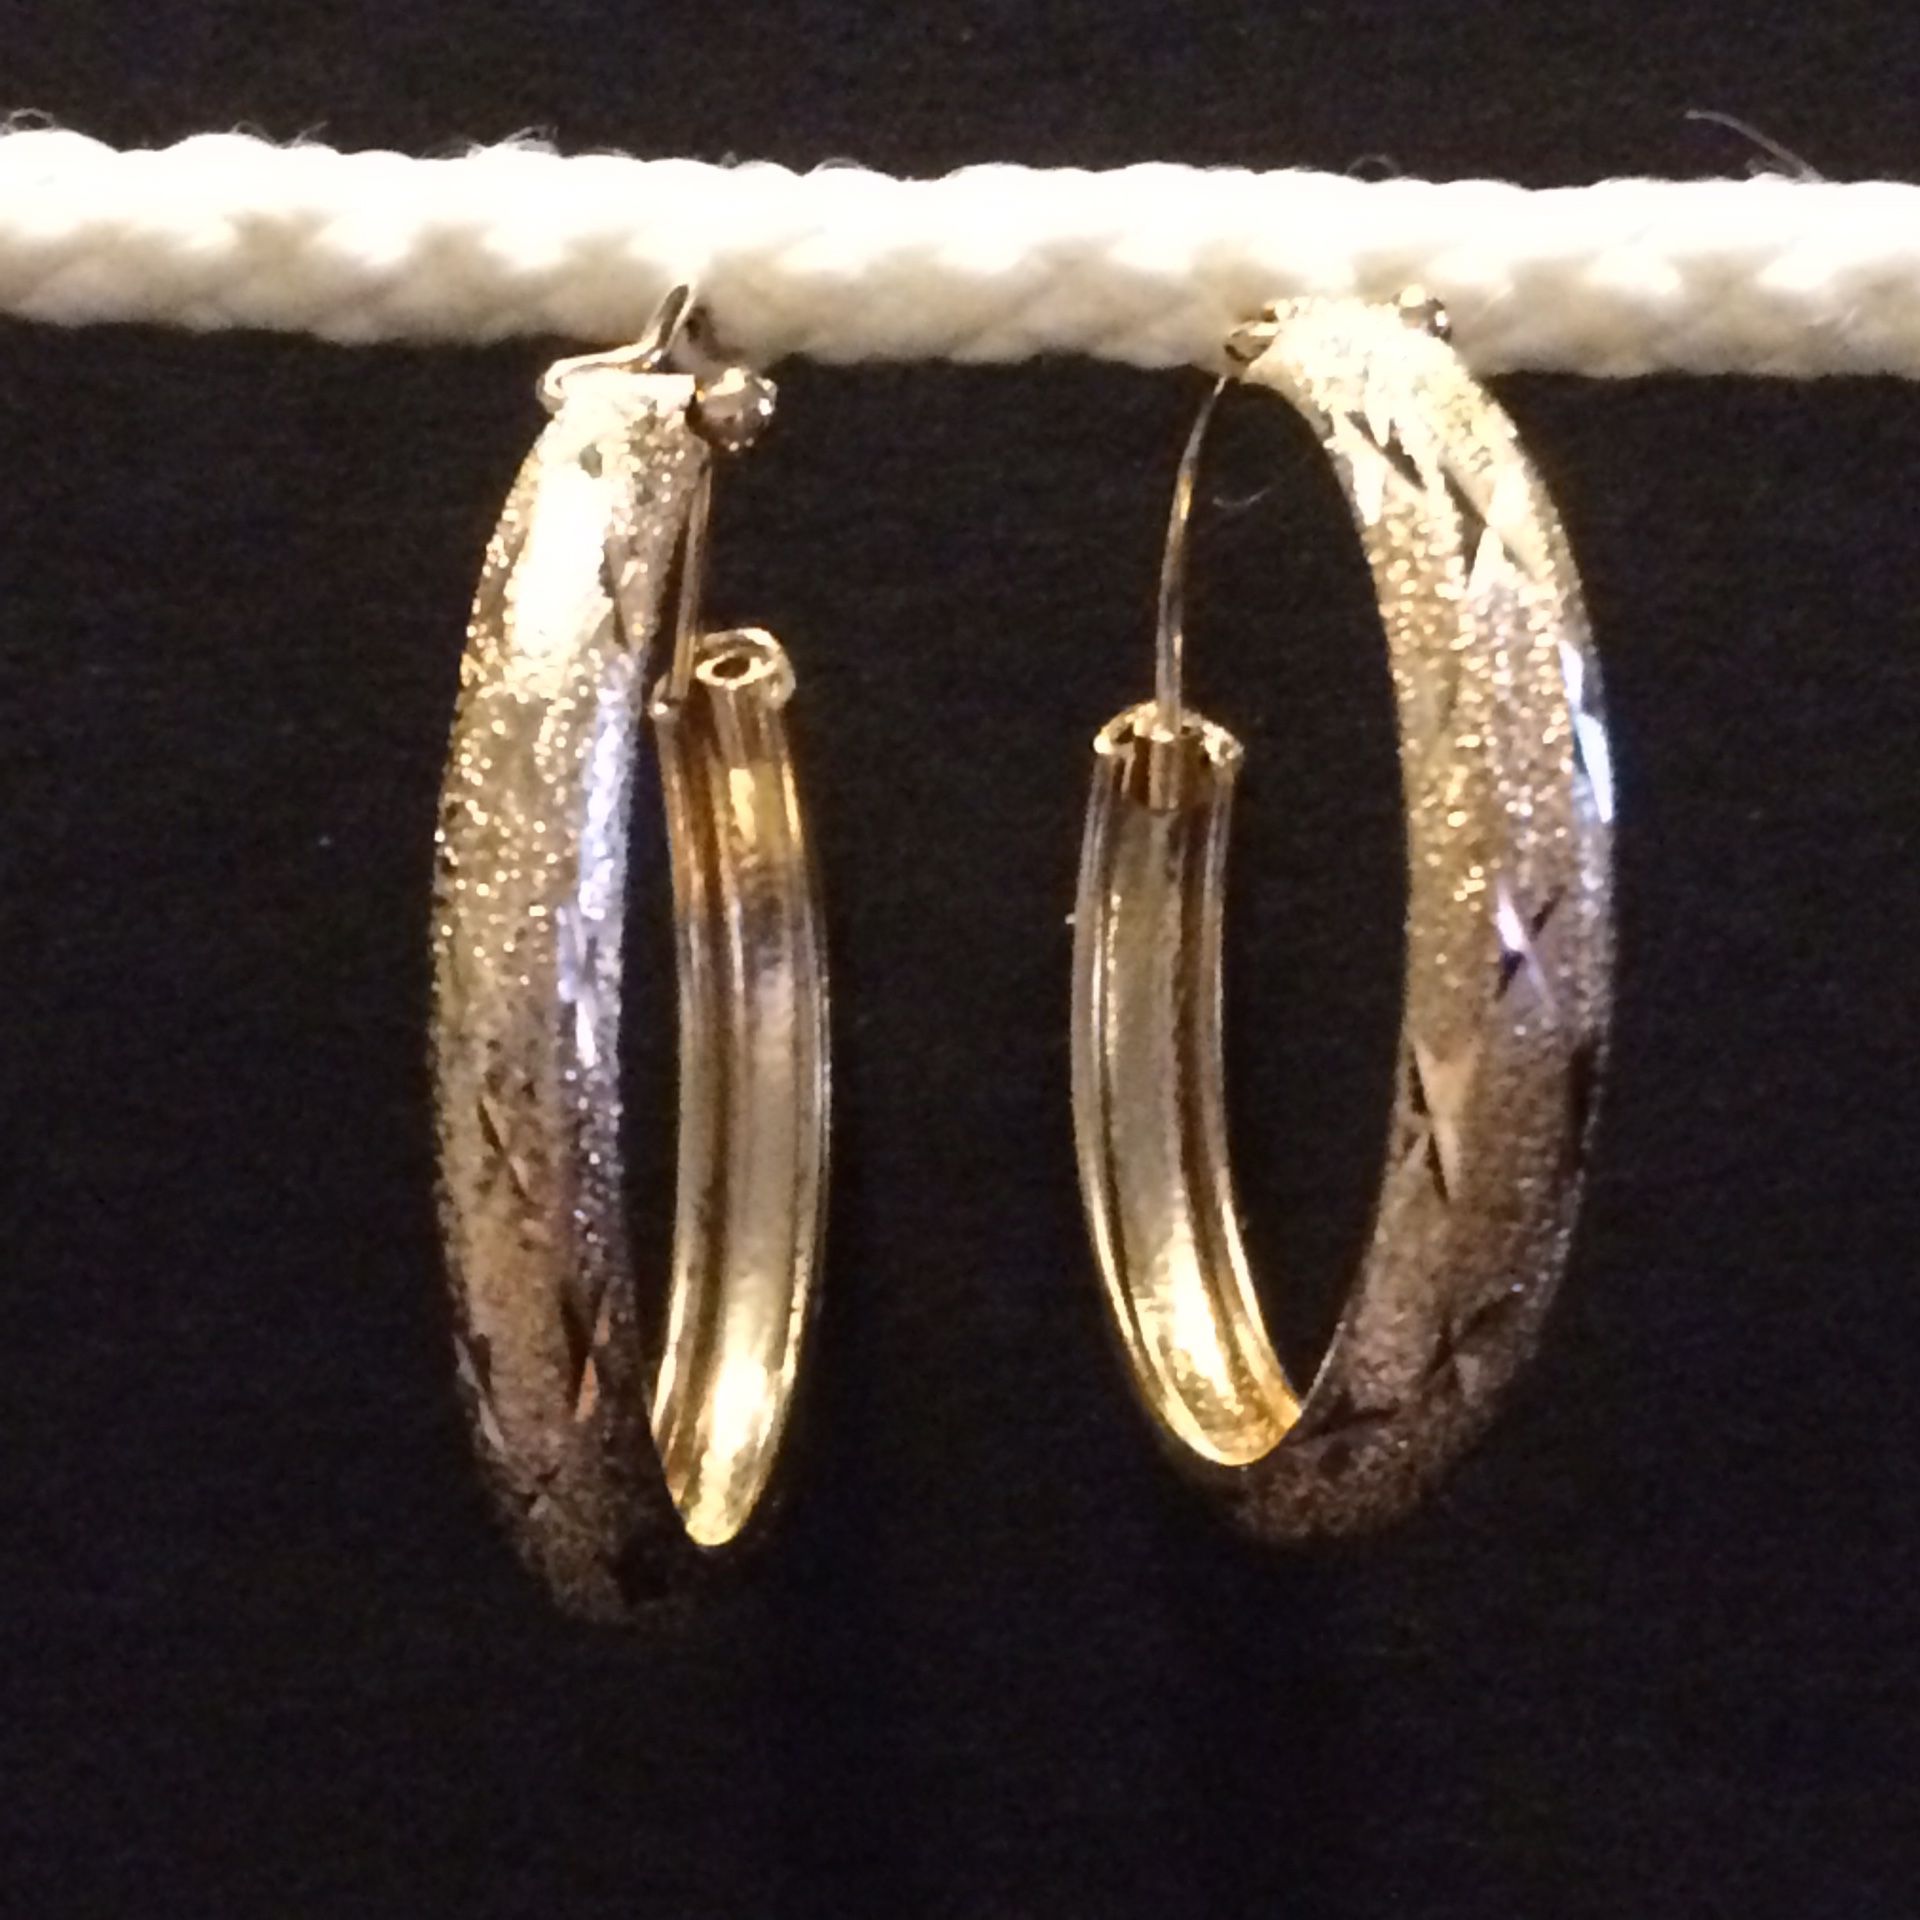 14 Kt gold Over sterling silver one and a half inch hoops